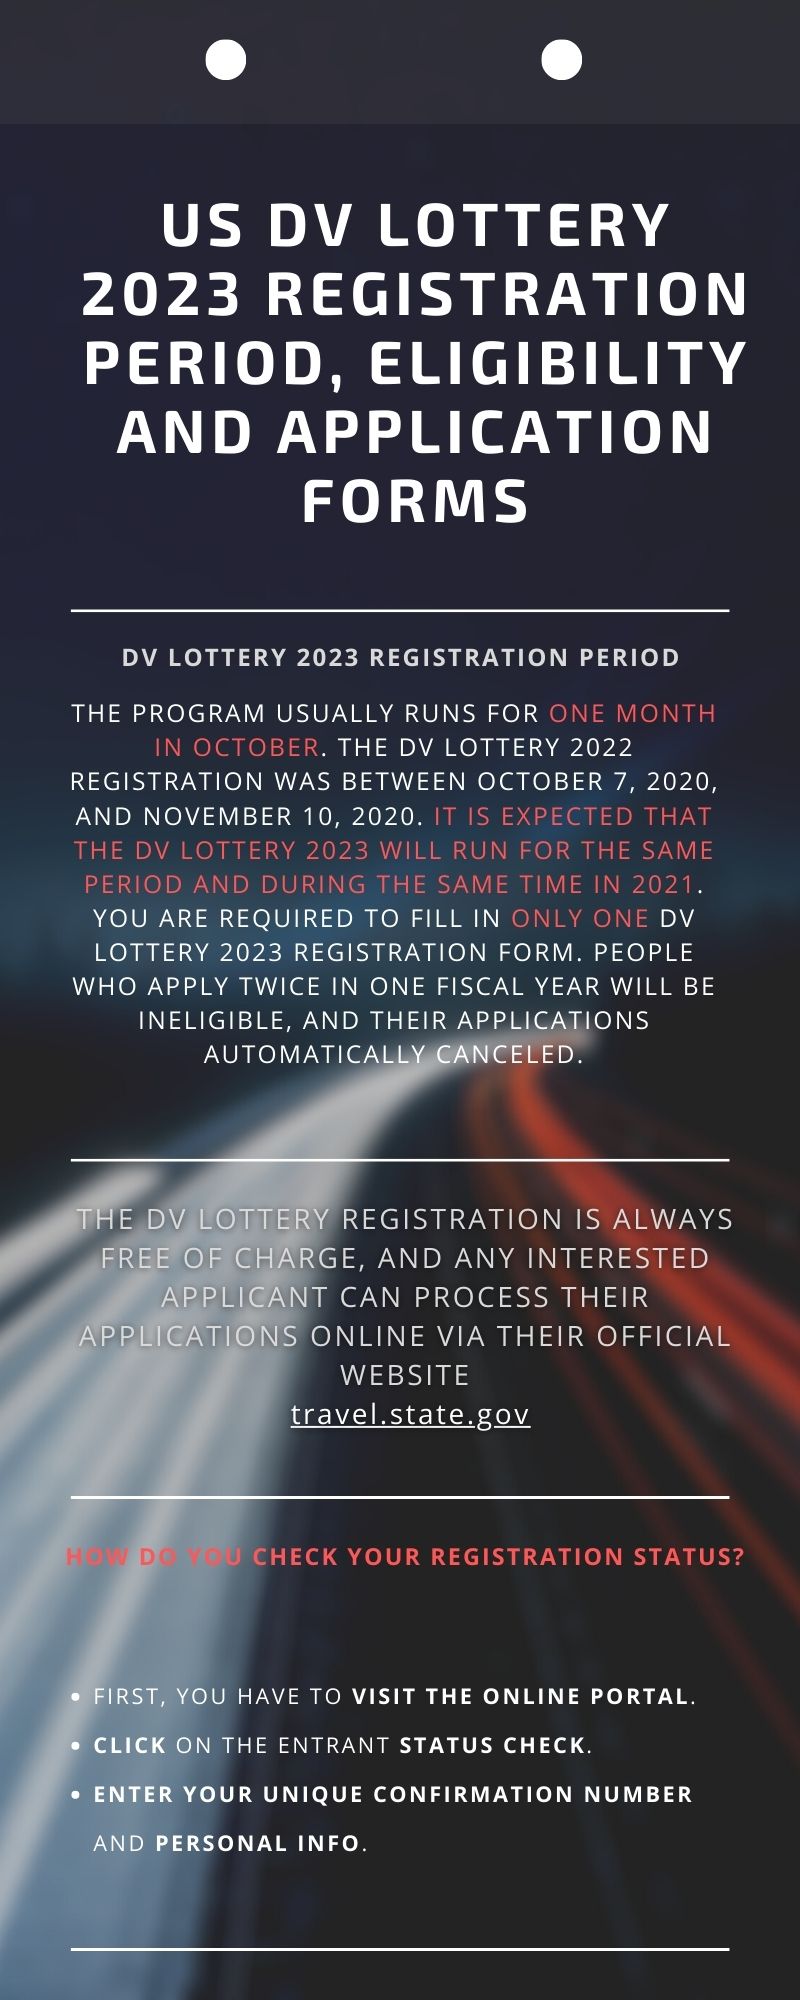 US DV lottery 2023 registration period, eligibility and application